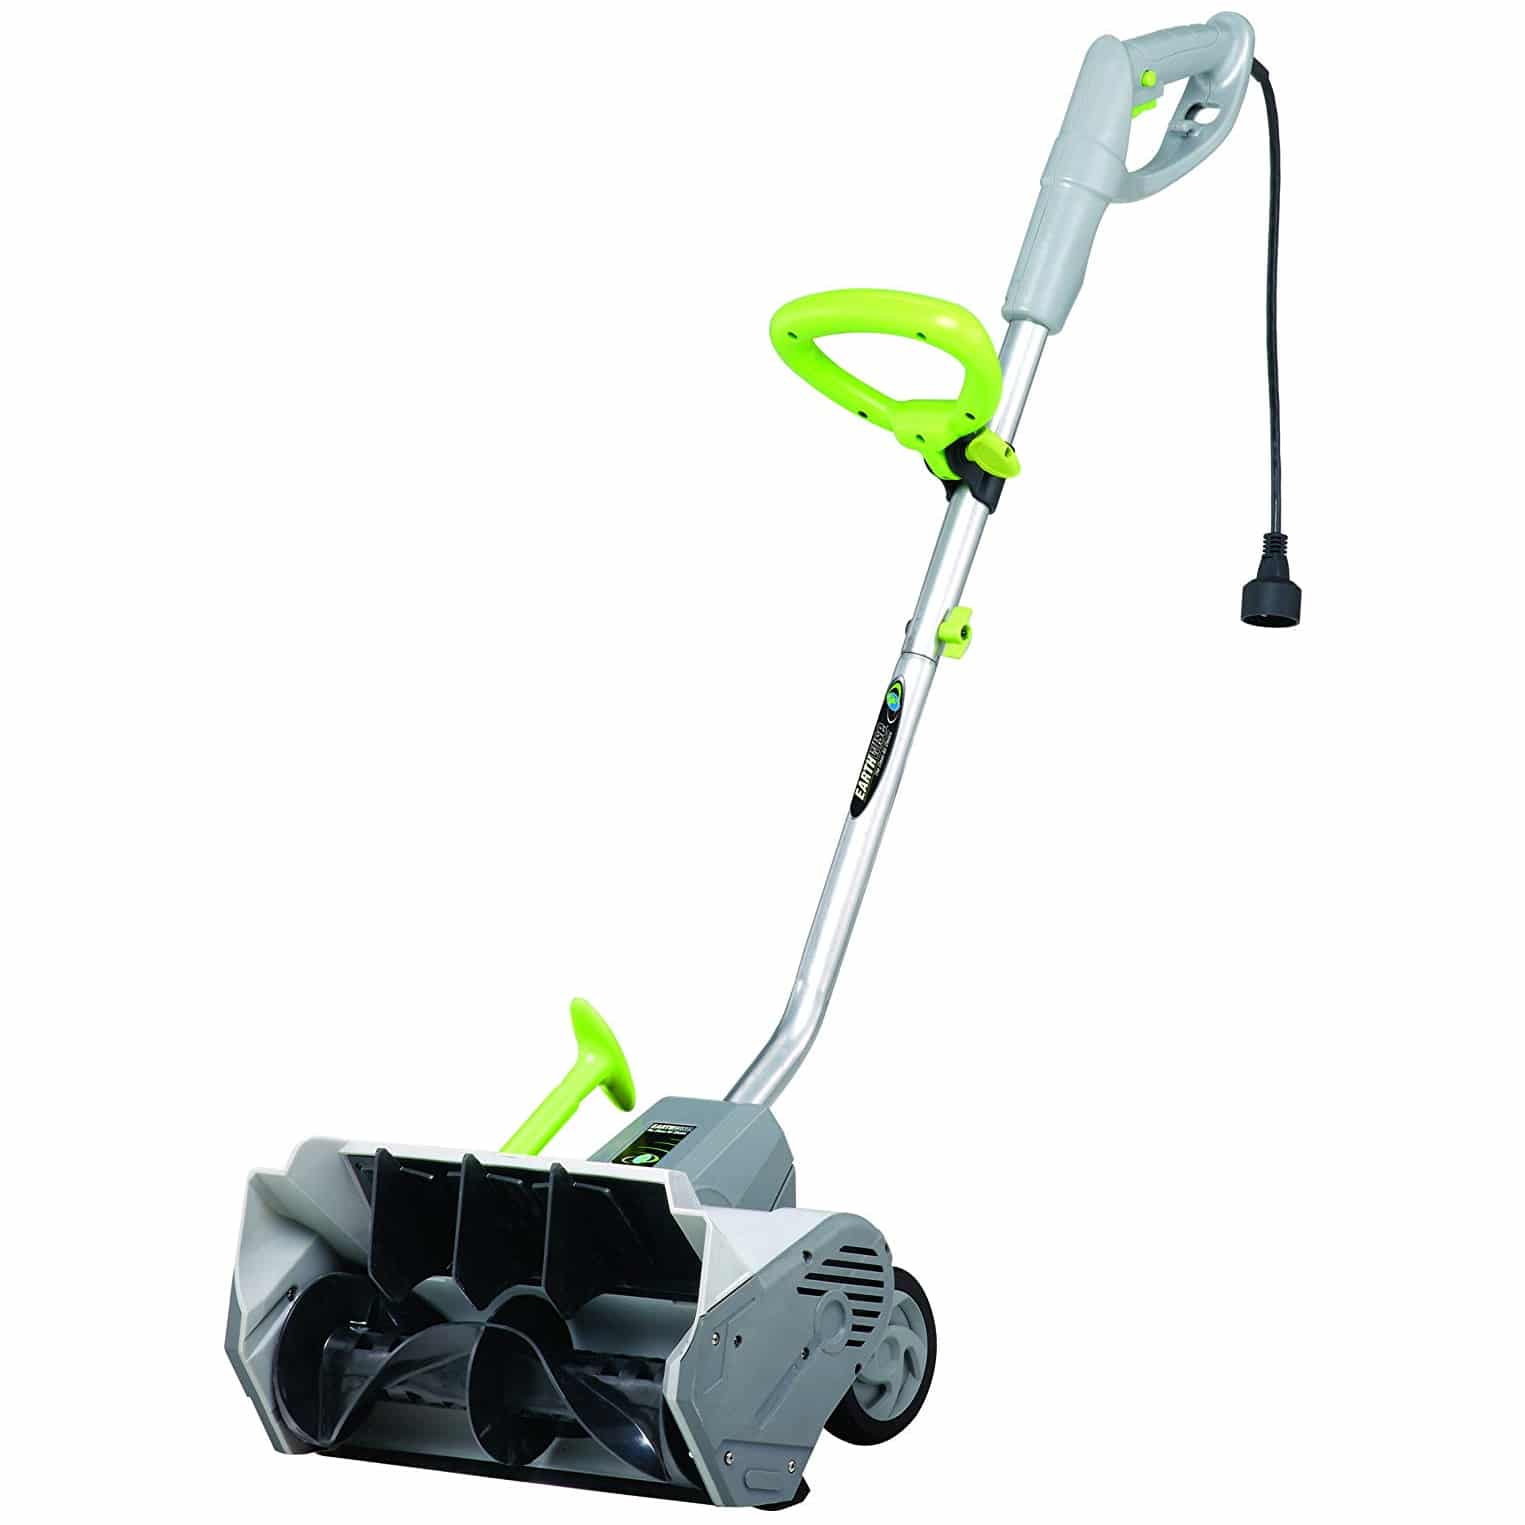 Earthwise Electric Snow Shovel